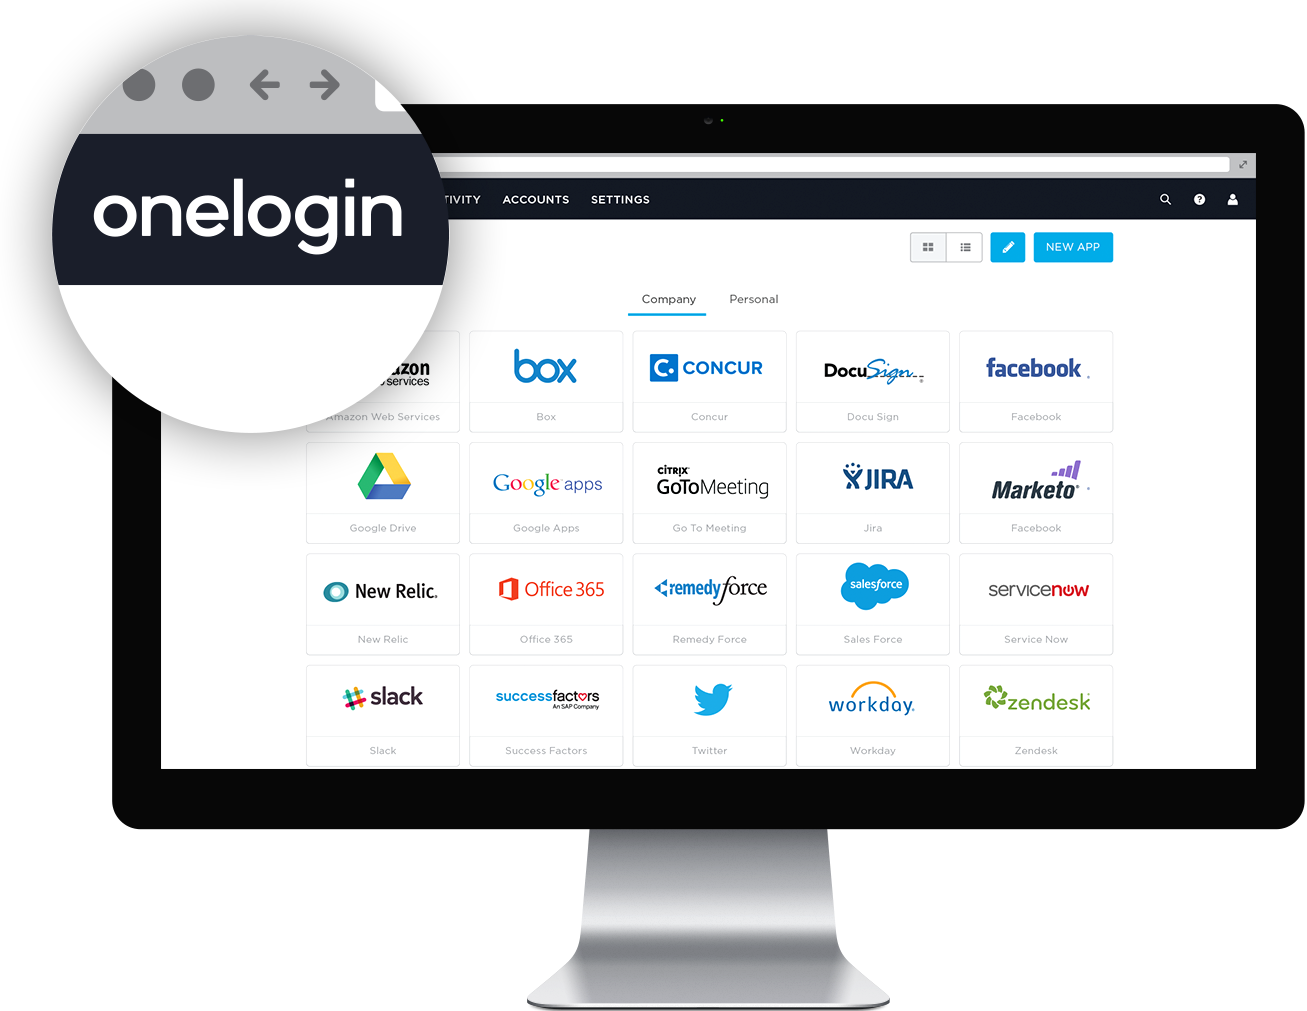 Single Sign-On Solution: One Portal for All Your Apps